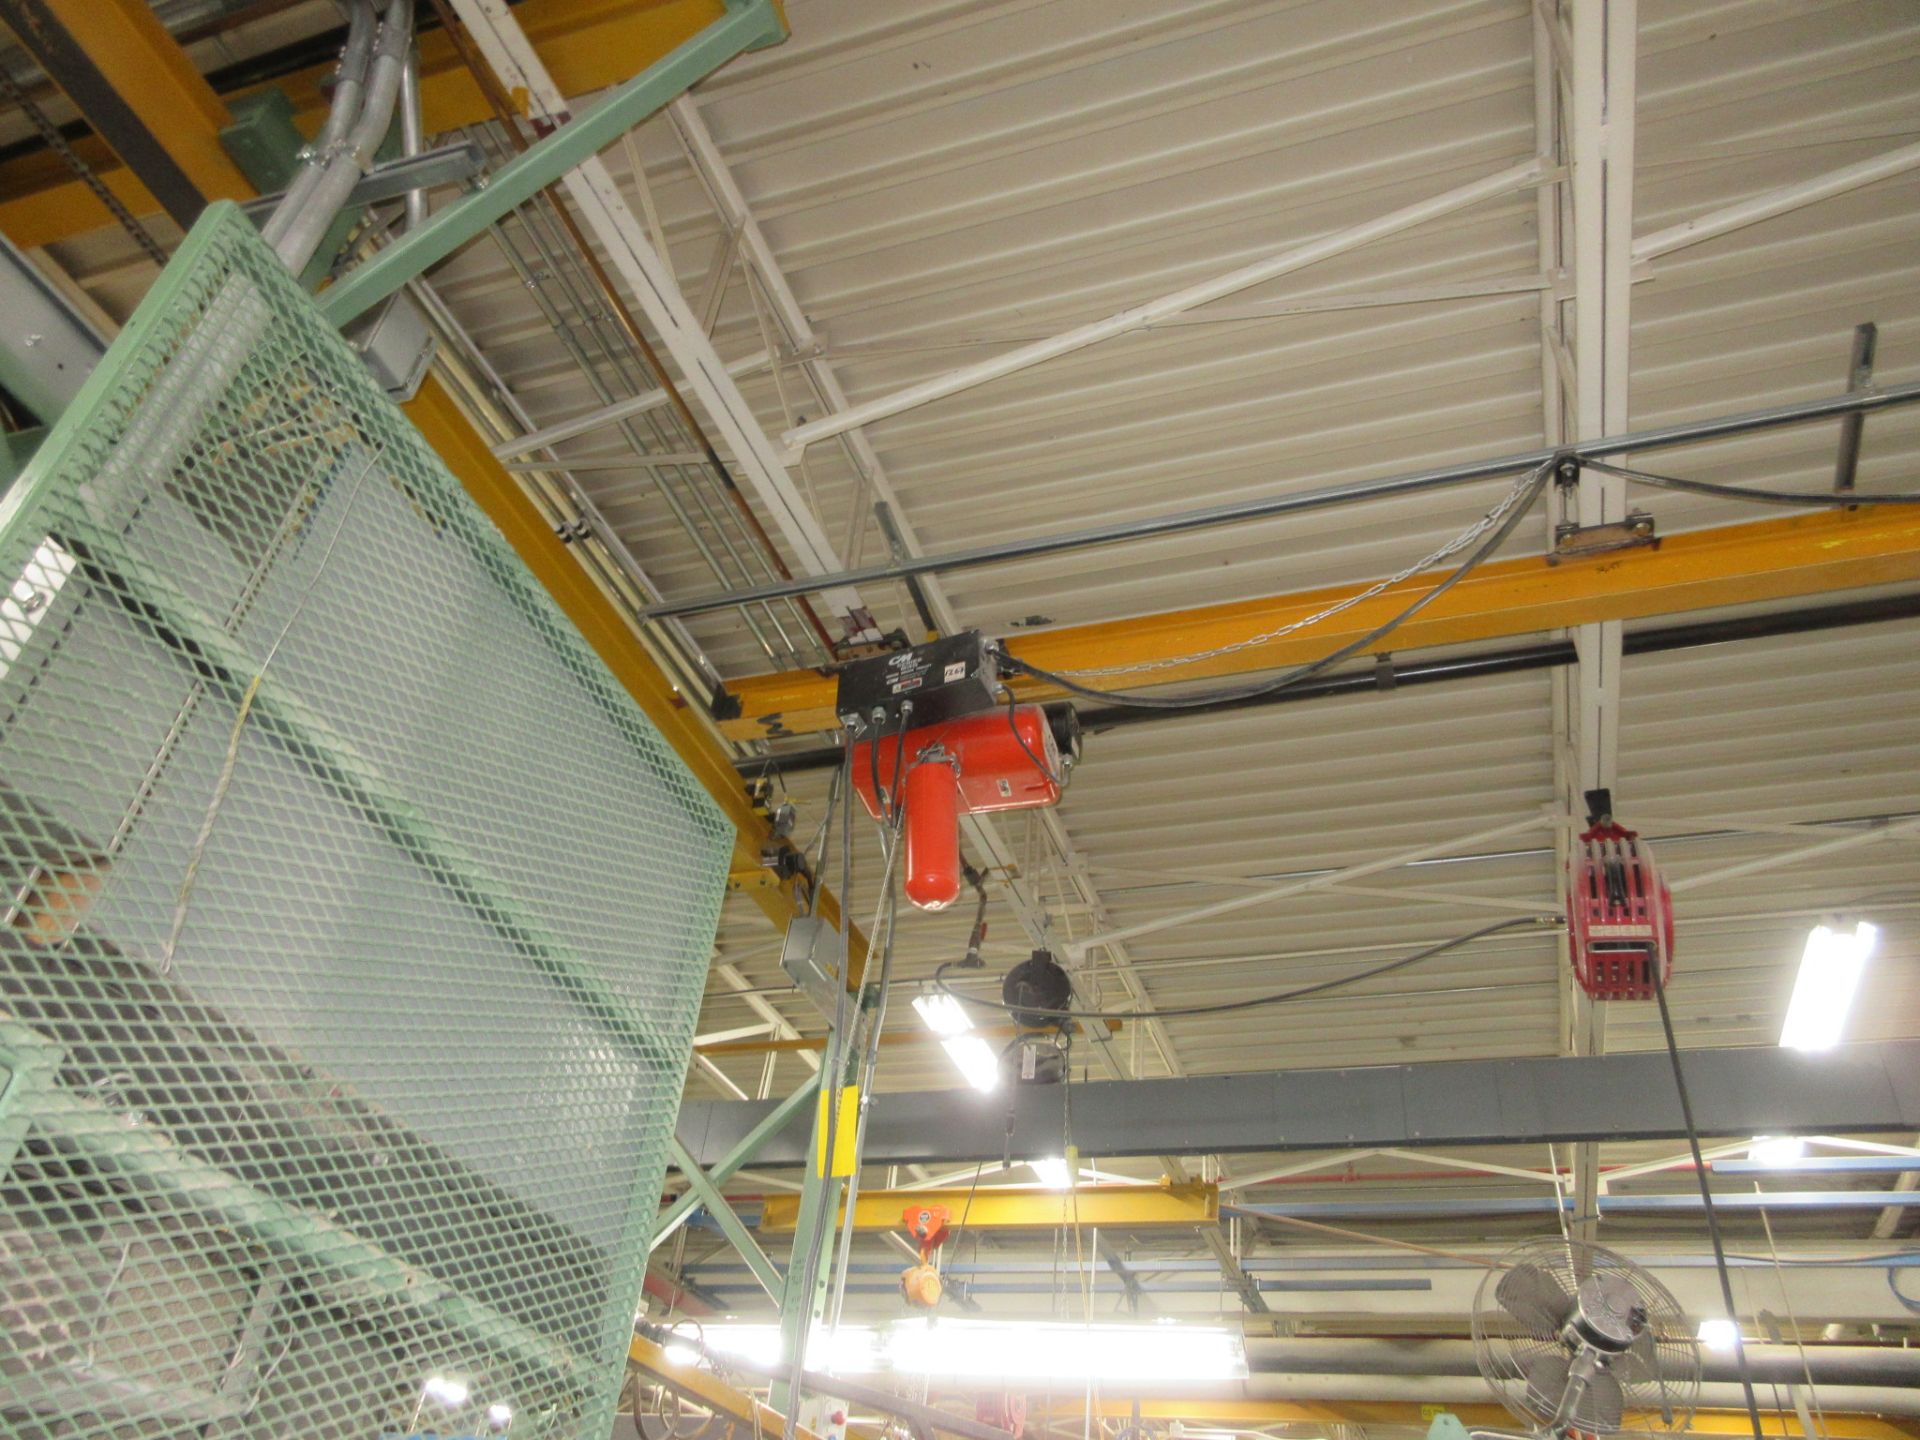 CM LODESTAR 1-TON CAP. ELECTRIC CHAIN HOIST W/ PENDANT CONTROL AND APPROX. 40' I-BEAM RUNWAY ( - Image 3 of 3